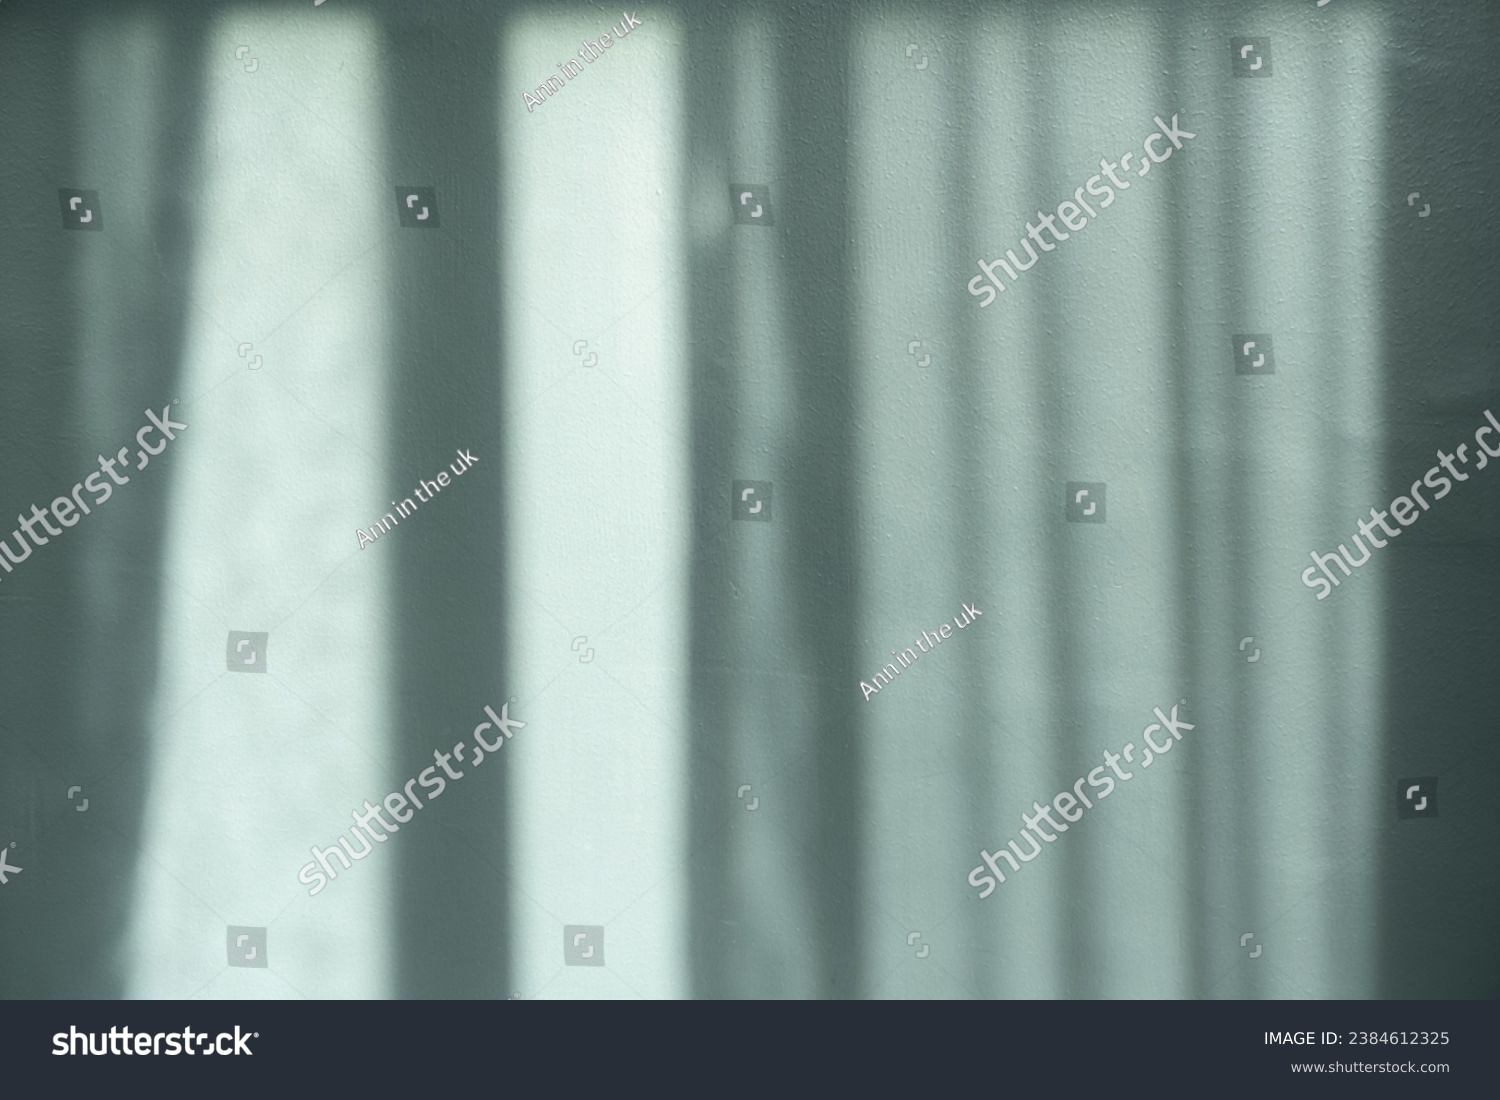 Background green wall,Light and shadows lines from see through curtain on concrete sureface texture,Empty Studio Room Display,Backdrop Concrete background,Cosmetic Product  #2384612325